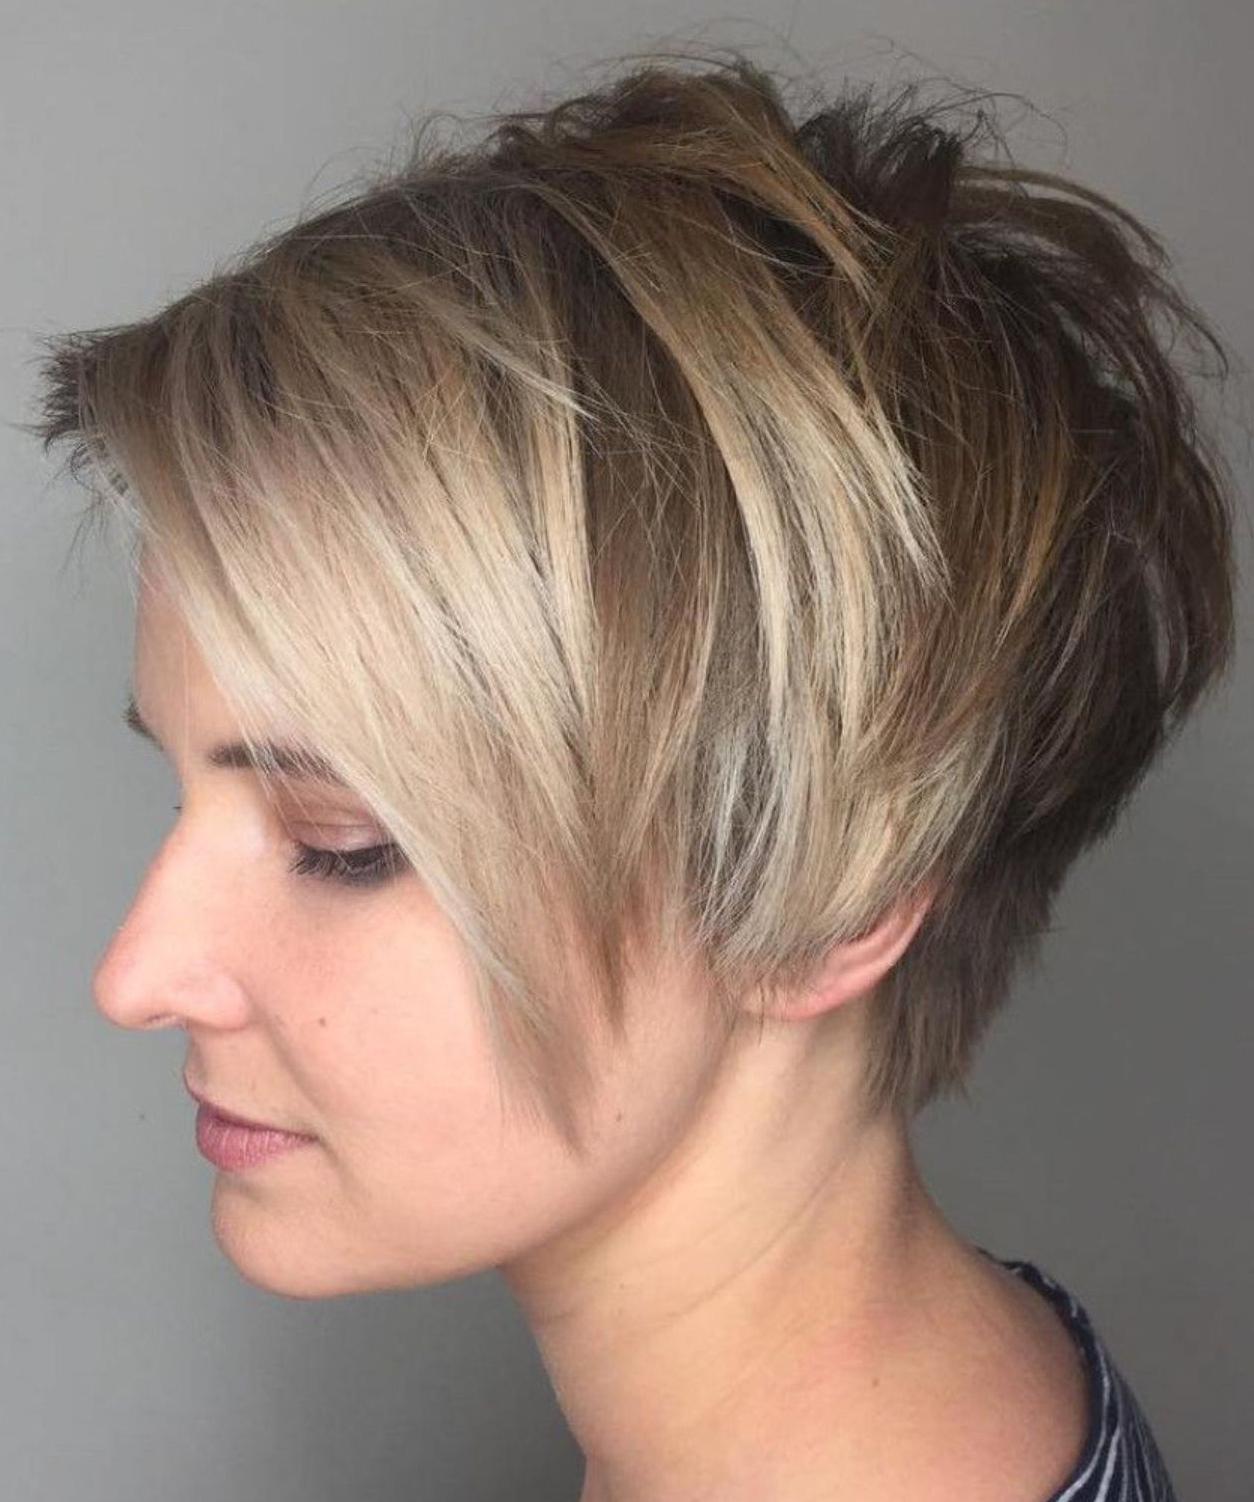 17 Fashionable Long Pixie Cuts for a Totally New You